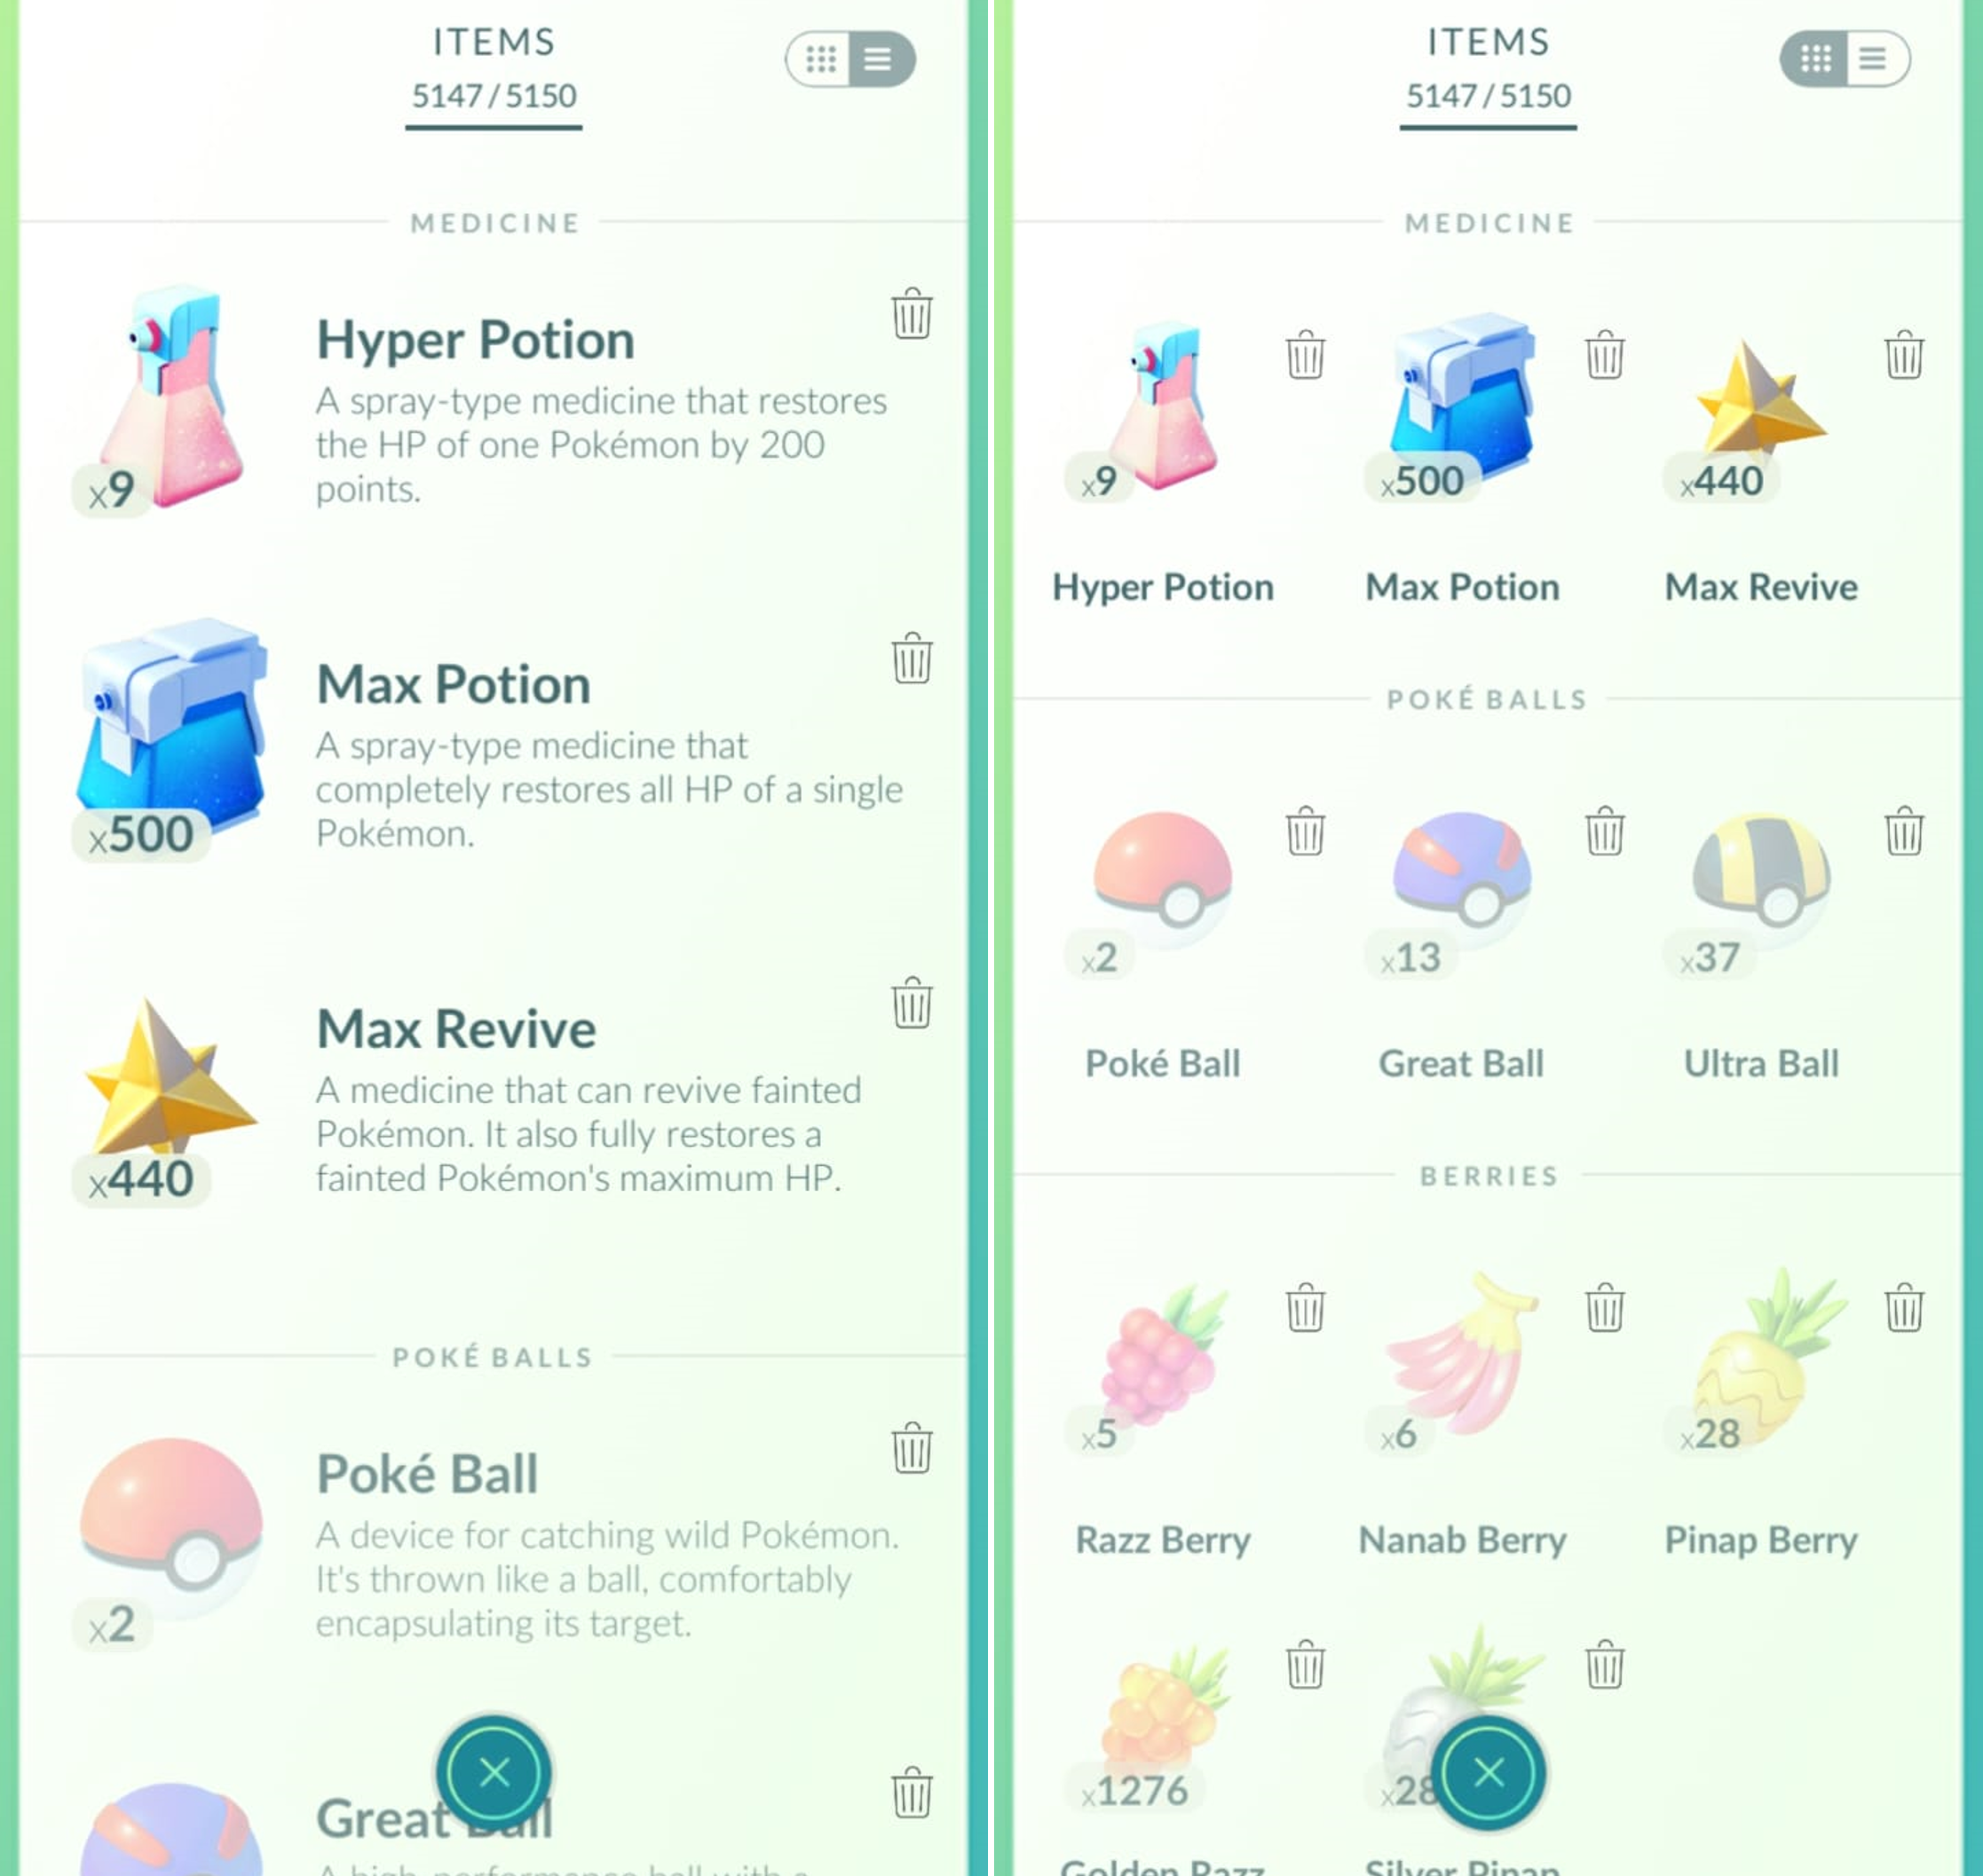 https://static.wikia.nocookie.net/pokemongo/images/f/fe/Items.png/revision/latest?cb=20221216152338